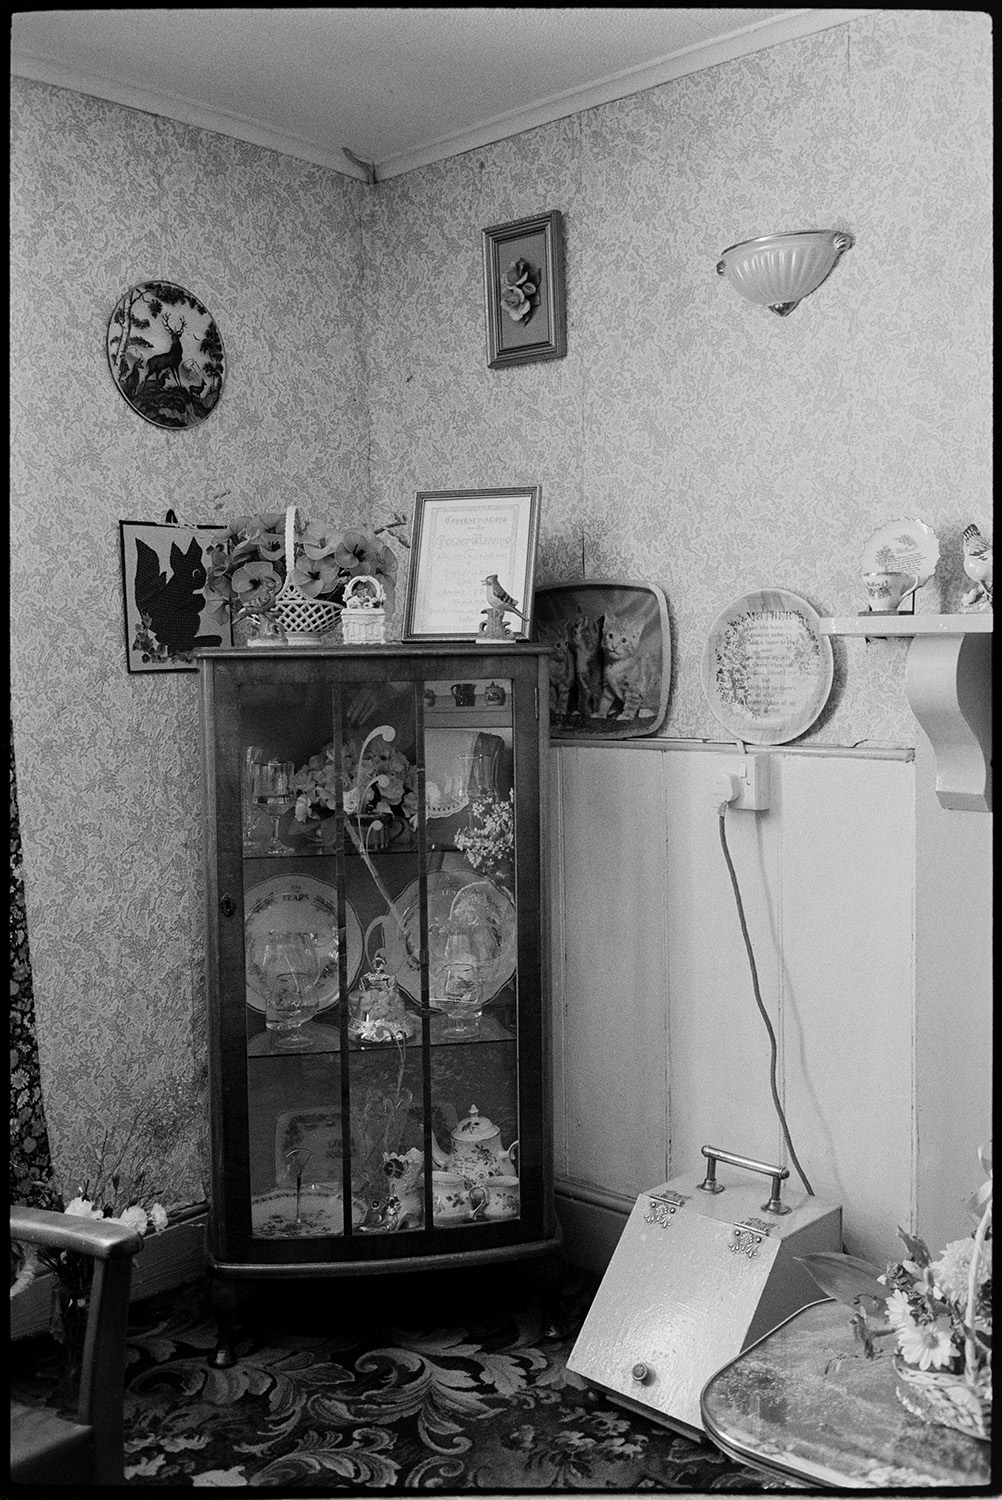 Interior mantelpiece, mirror, comparison with old photo. Ashton, tailor's house.
[Interior of a house in Tricks Terrace, Beaford, which used to belong to Mr Ashton, showing a display cabinet containing china pieces. Four pictures and a plate are hung on the wall nearby, which is covered with patterned wallpaper. Mr Ashton was a tailor. An earlier image of the house decorated after his death can be found in the Beaford Old Archive at b00848.]